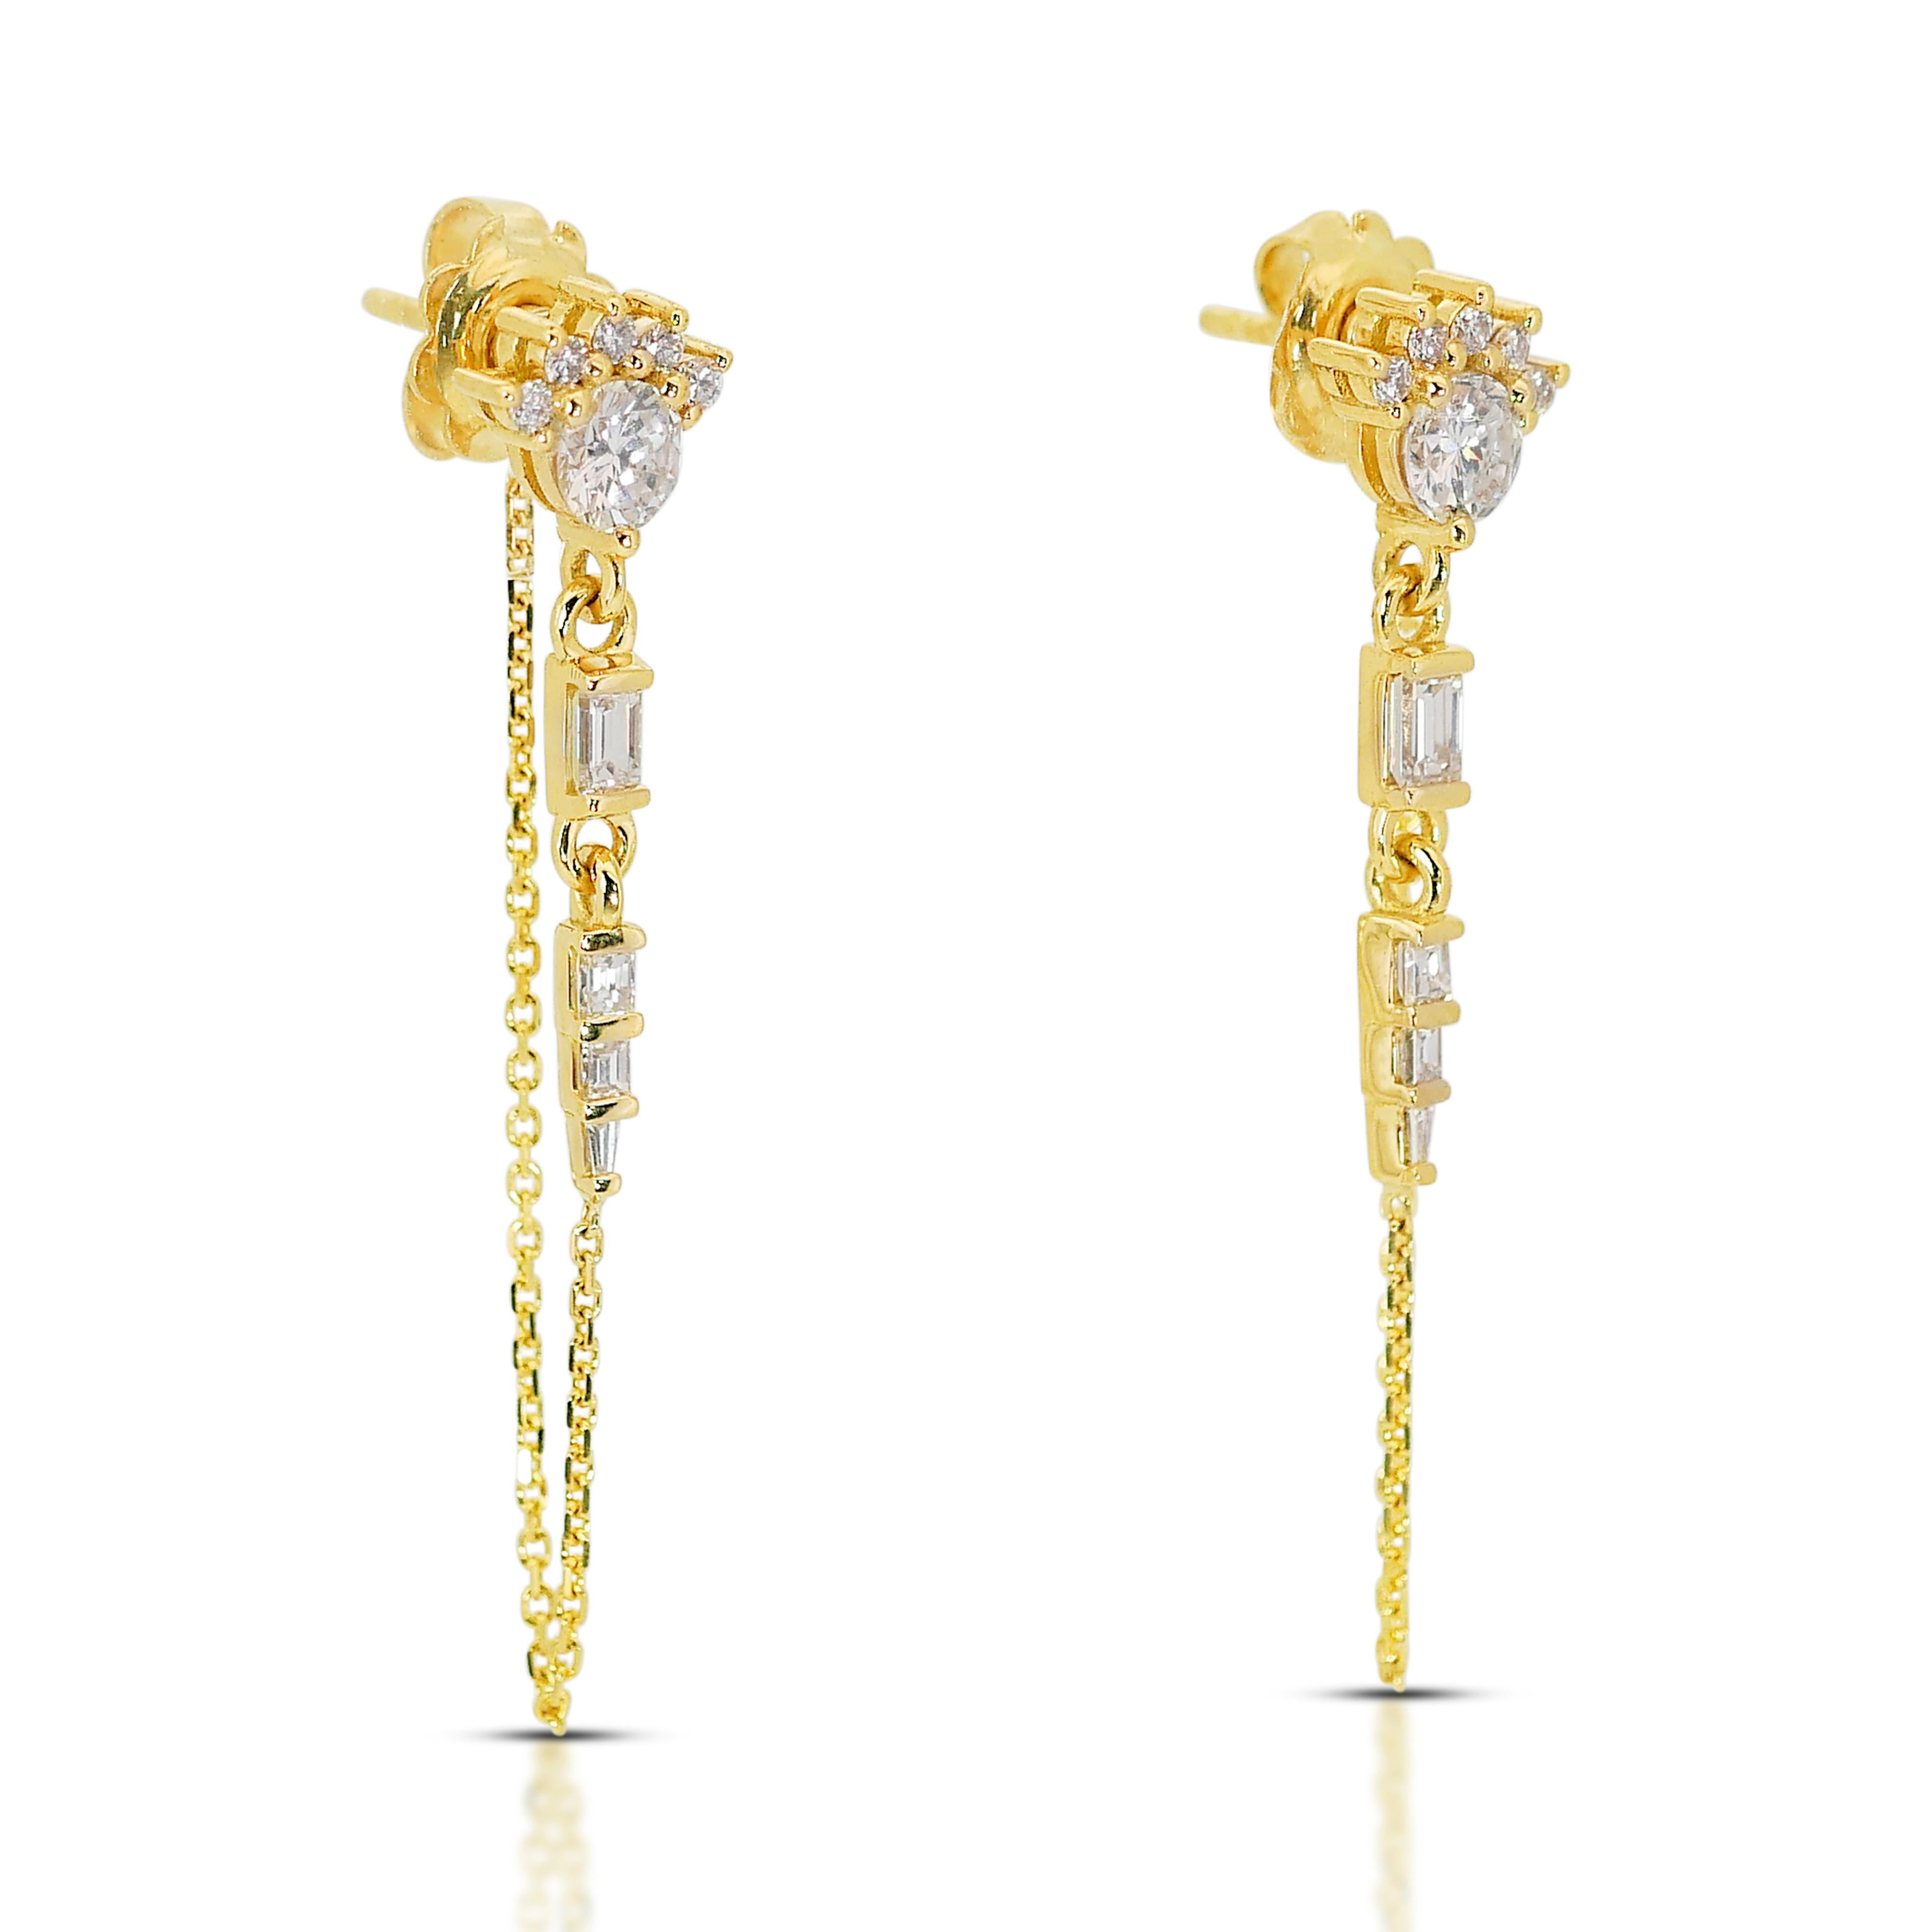 Fascinating 18K Yellow Gold Diamond Drop Earrings with 1.19ct - IGI Certified For Sale 1